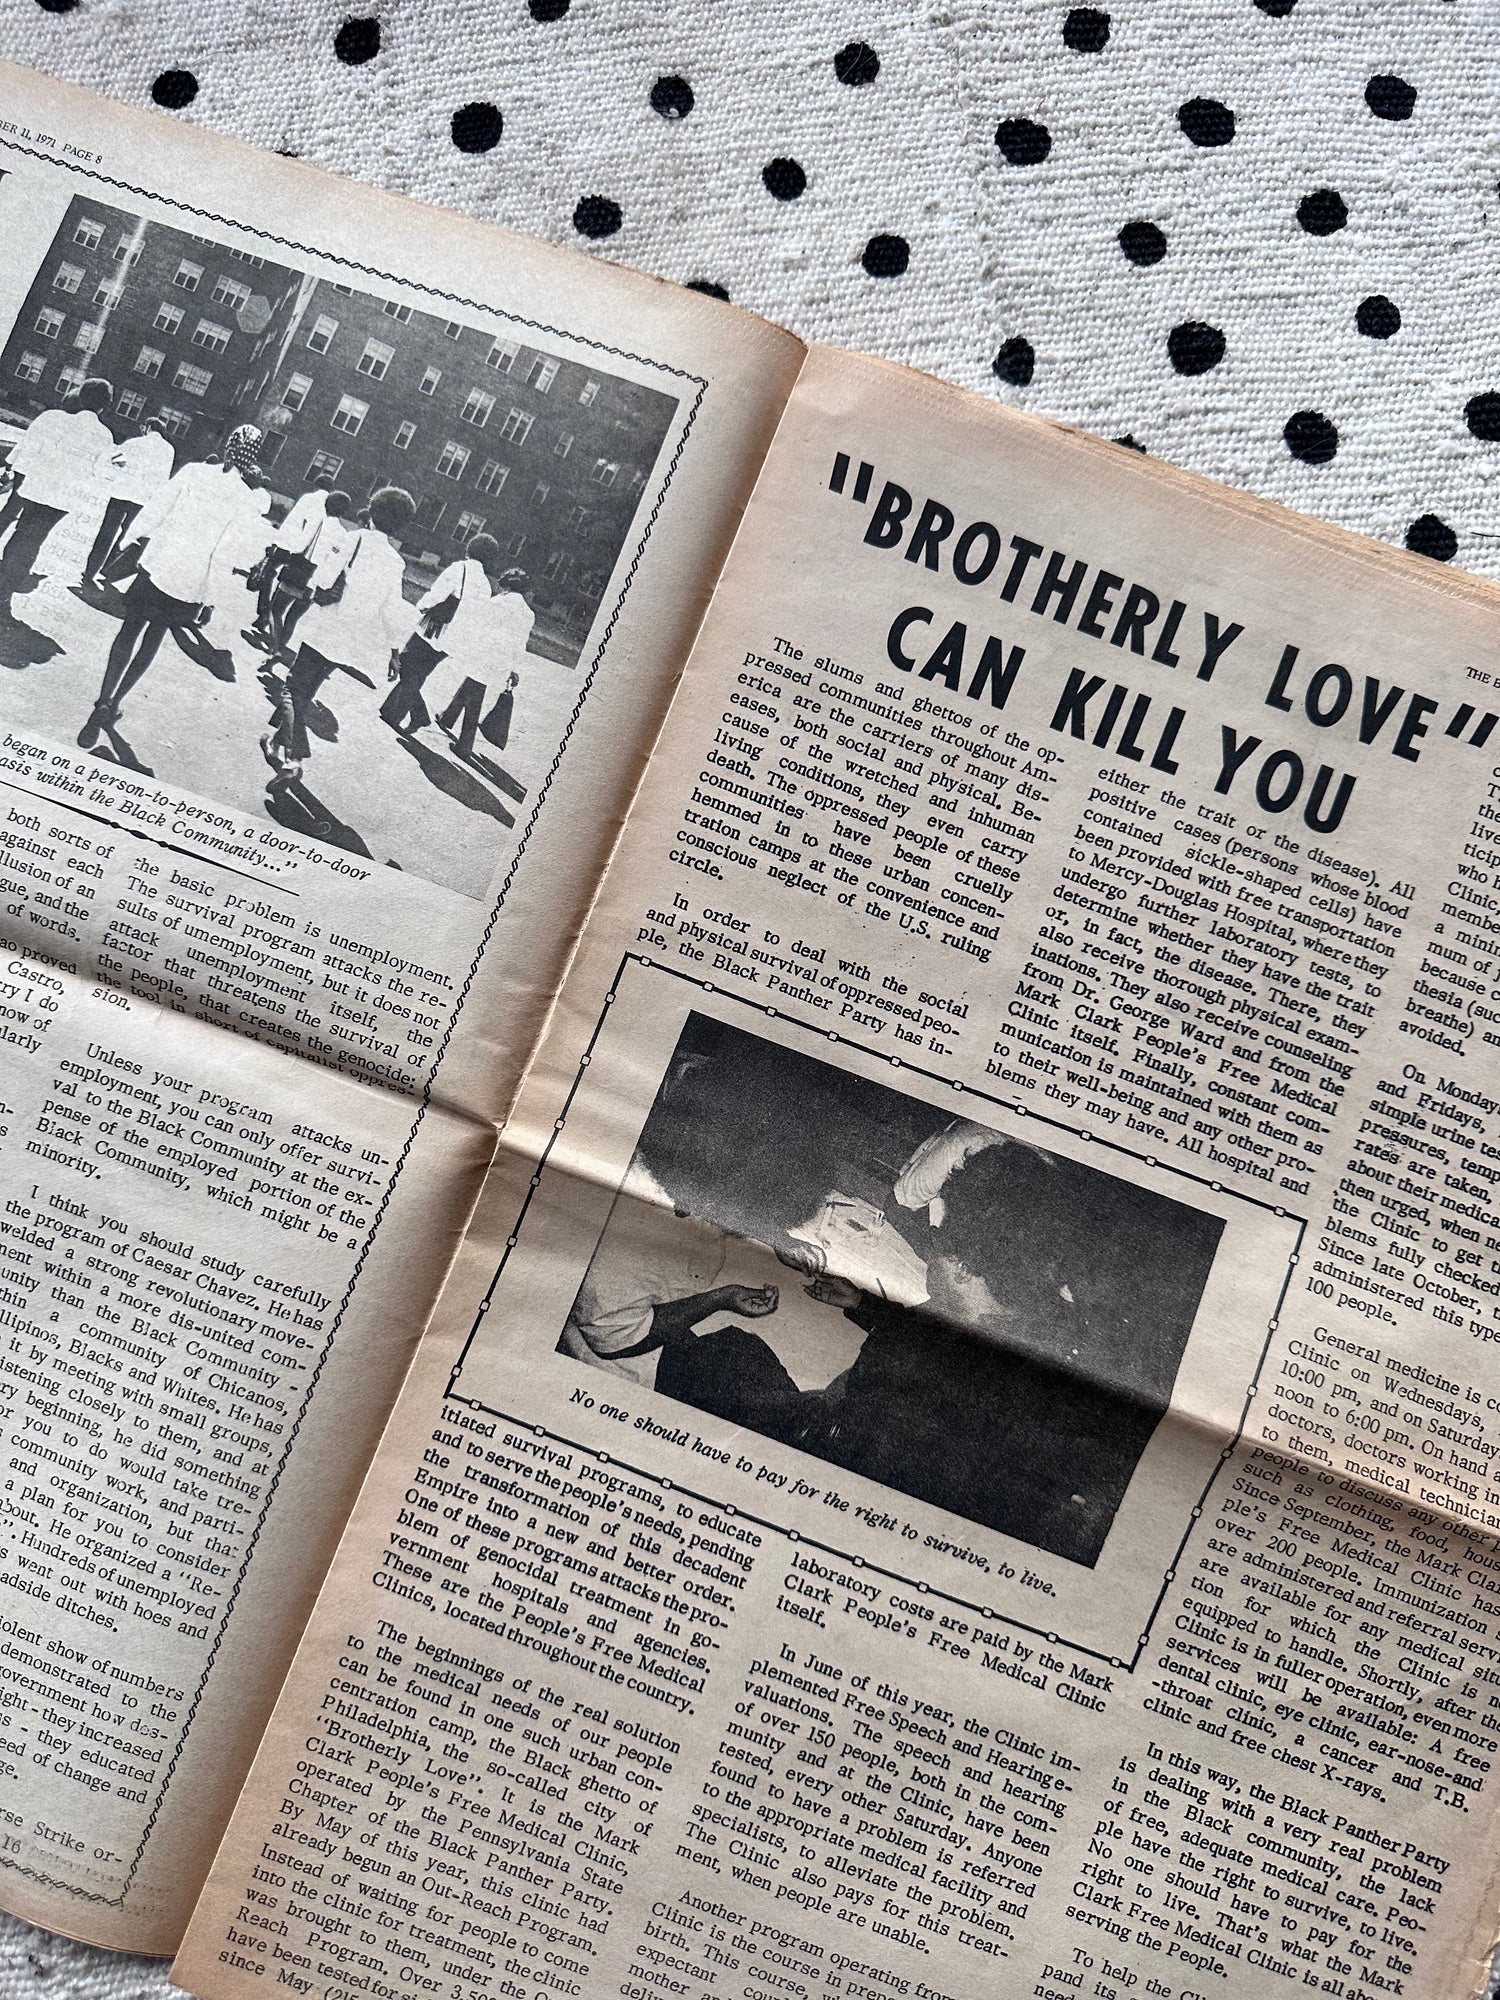 Original Black Panther Party Newspaper -- Cash In On Your Family (1971)